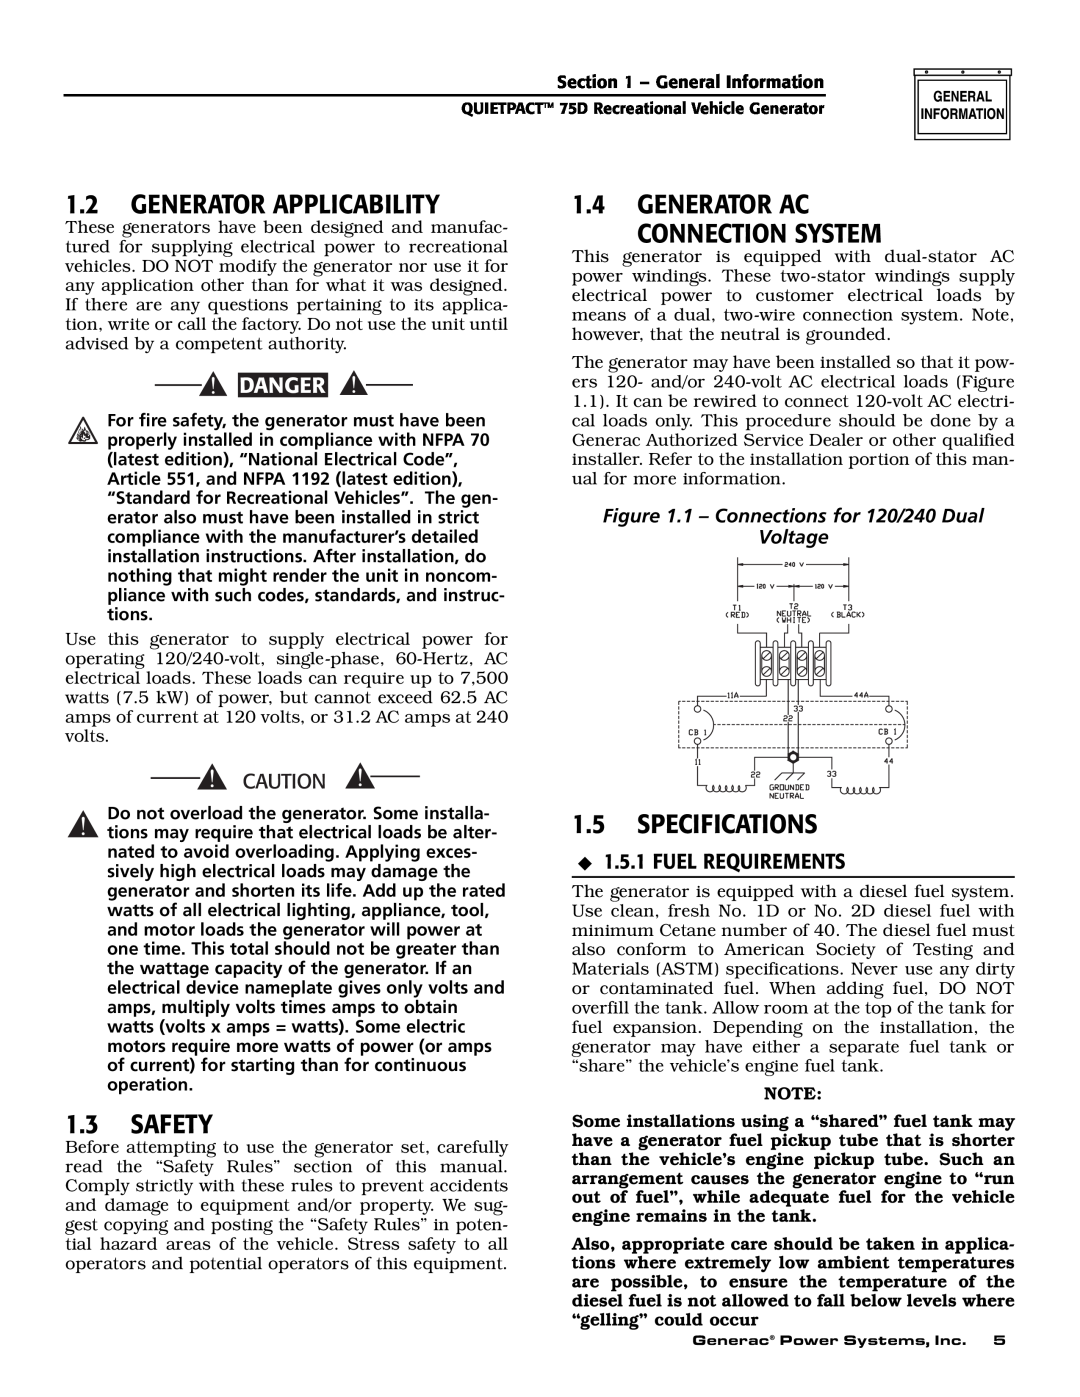 Guardian Technologies 004270-2 Generator Applicability, Safety, Generator Ac Connection System, Specifications, Danger 